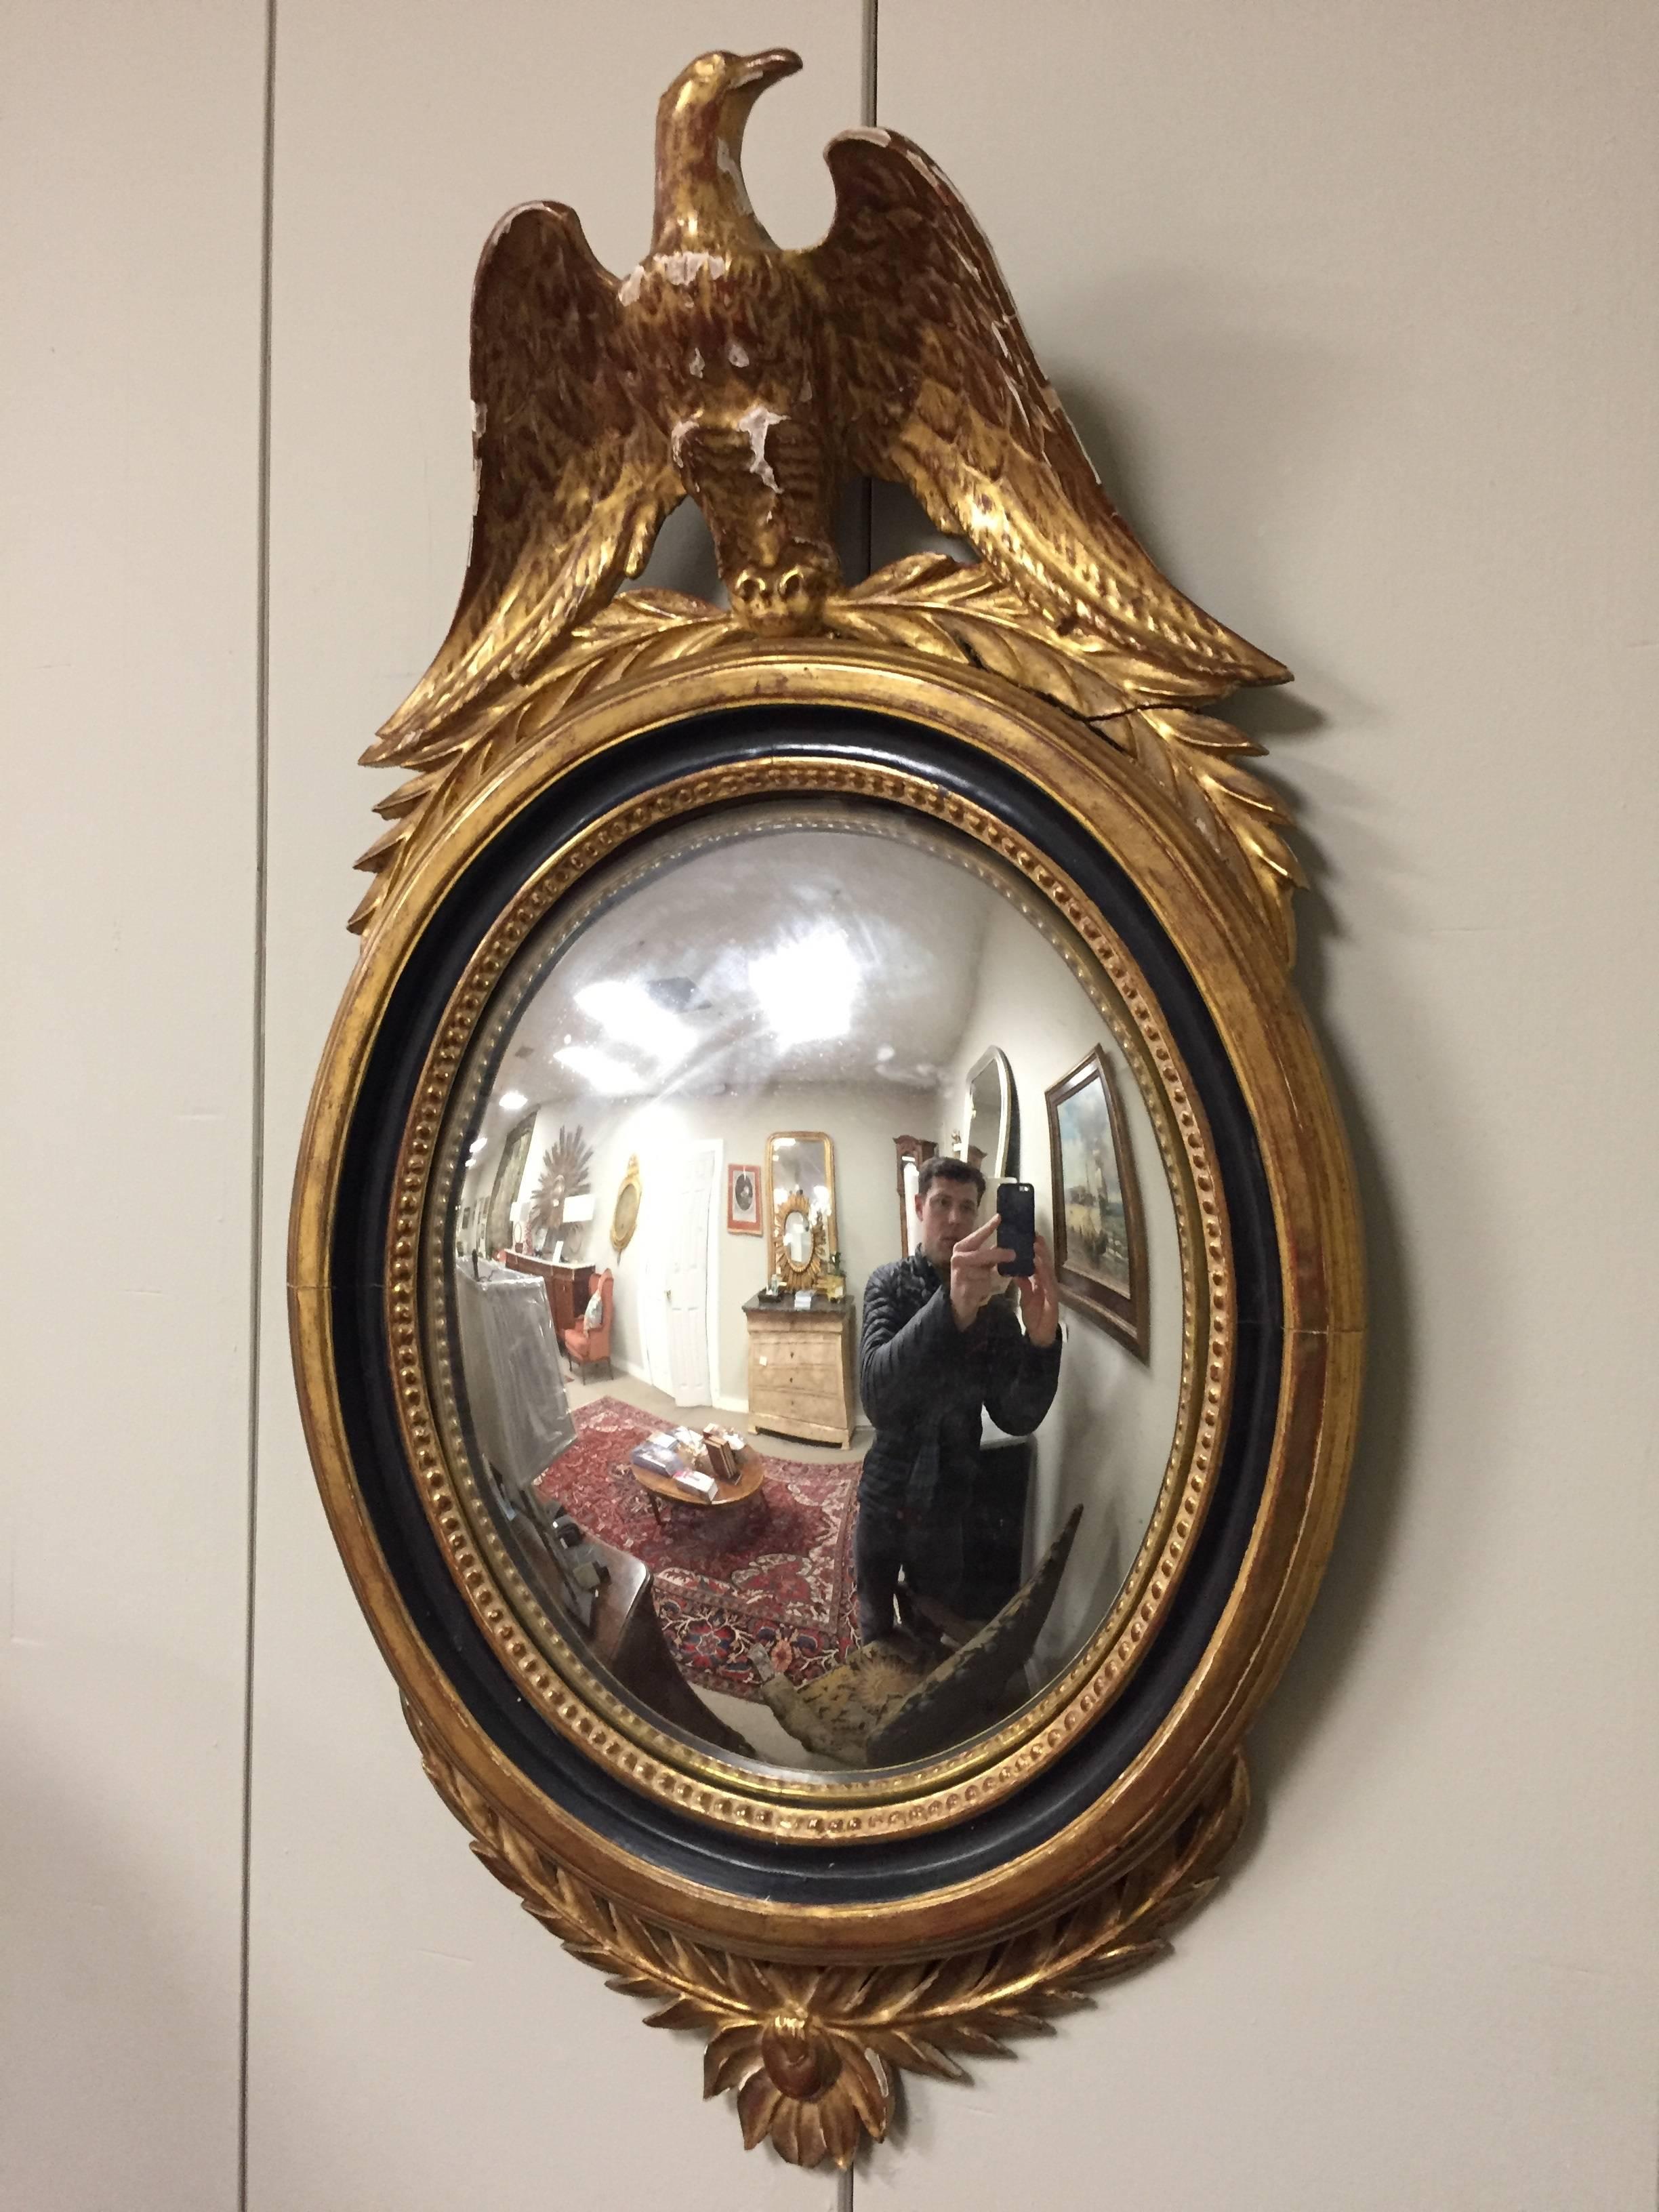 Late 19th or very early 20th century Regency carved and ebonized giltwood bullseye mirror. The convex mirror framed in a spectacular ebony and gilt decorated frame with a lower carving leading to an interior ebony frame. The top adorning a eagle